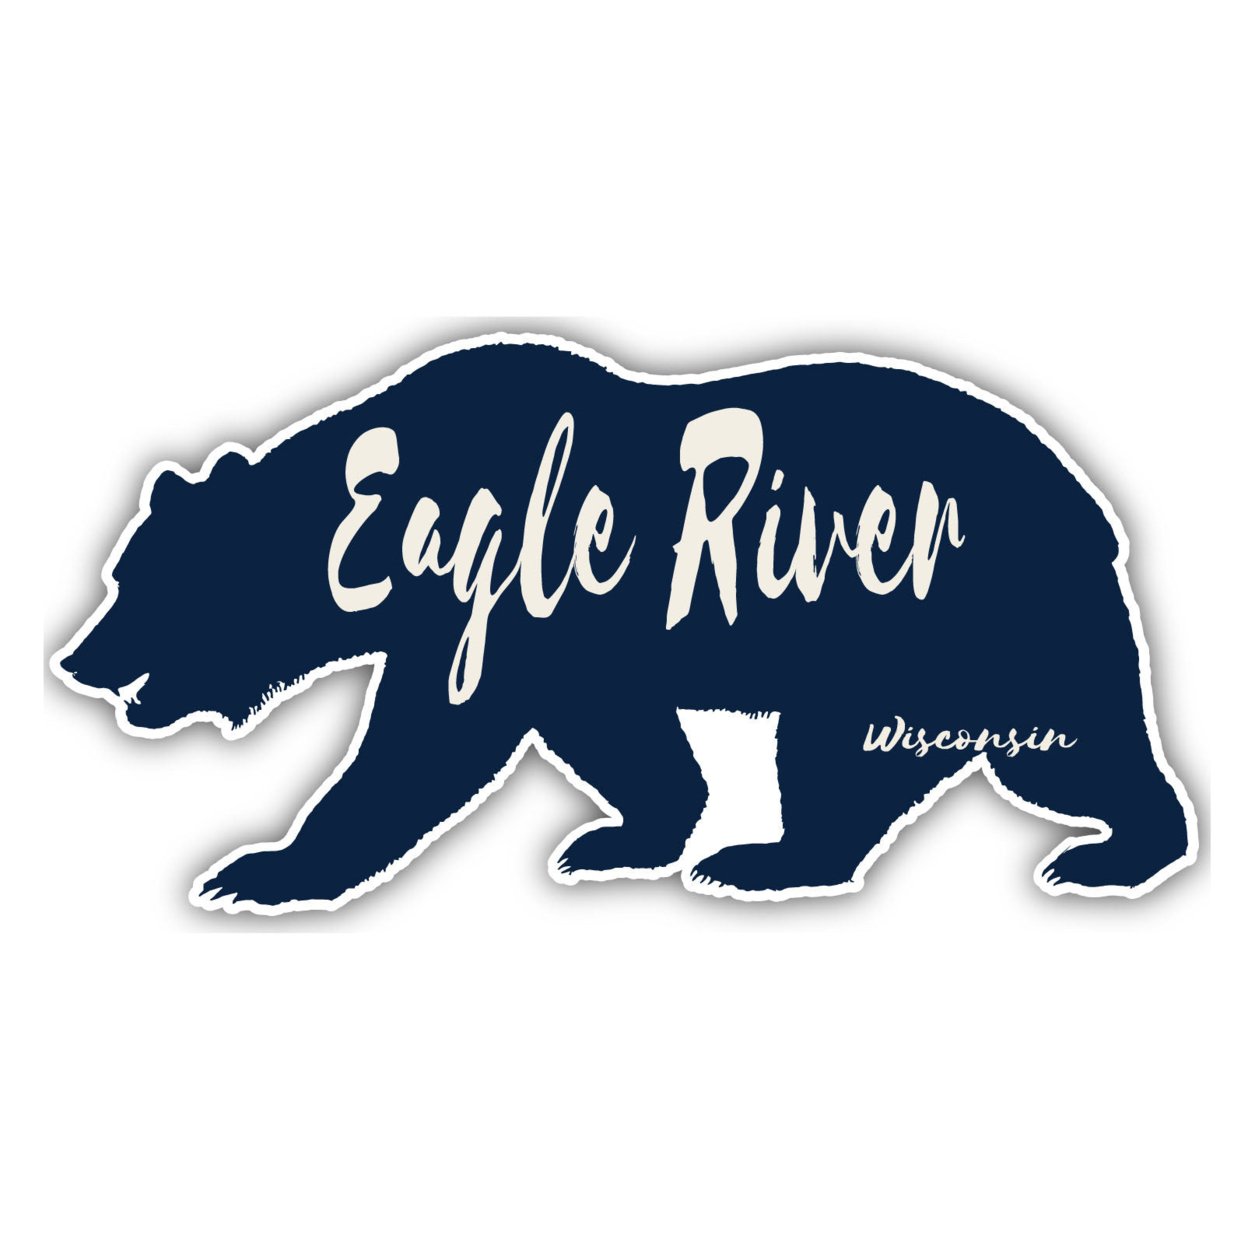 Eagle River Wisconsin Souvenir Decorative Stickers (Choose Theme And Size) - 4-Pack, 6-Inch, Bear